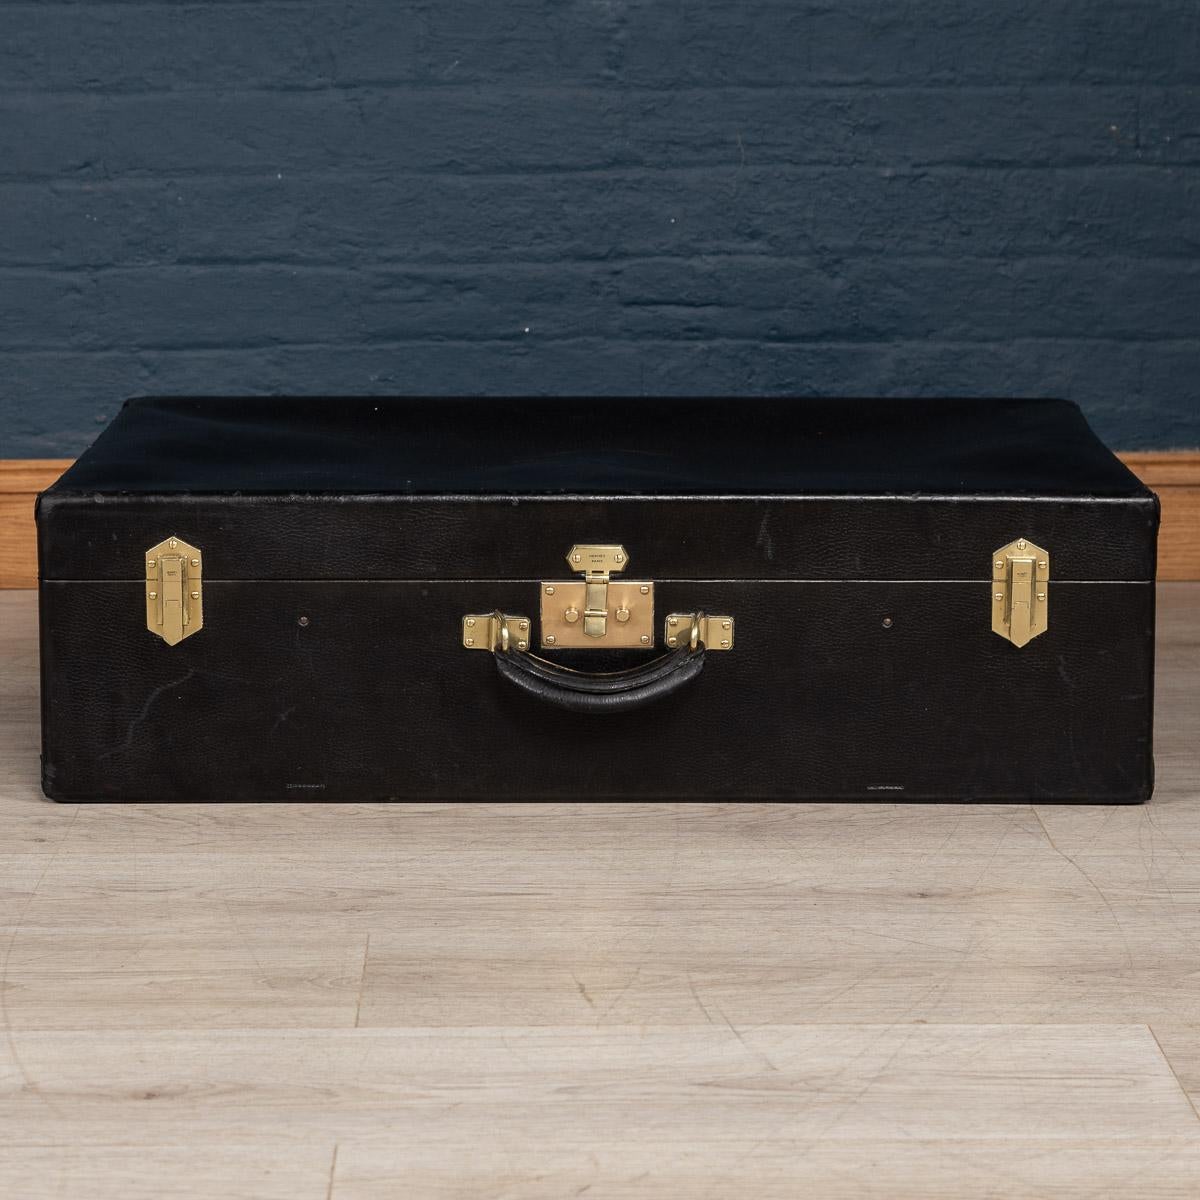 A very rare Hermès suitcase in black leatherette covering and brass locks and side latches, made in France in the first half of the 20th century. A great addition to any collection and a fantastic item to have as part of a stack in any interior